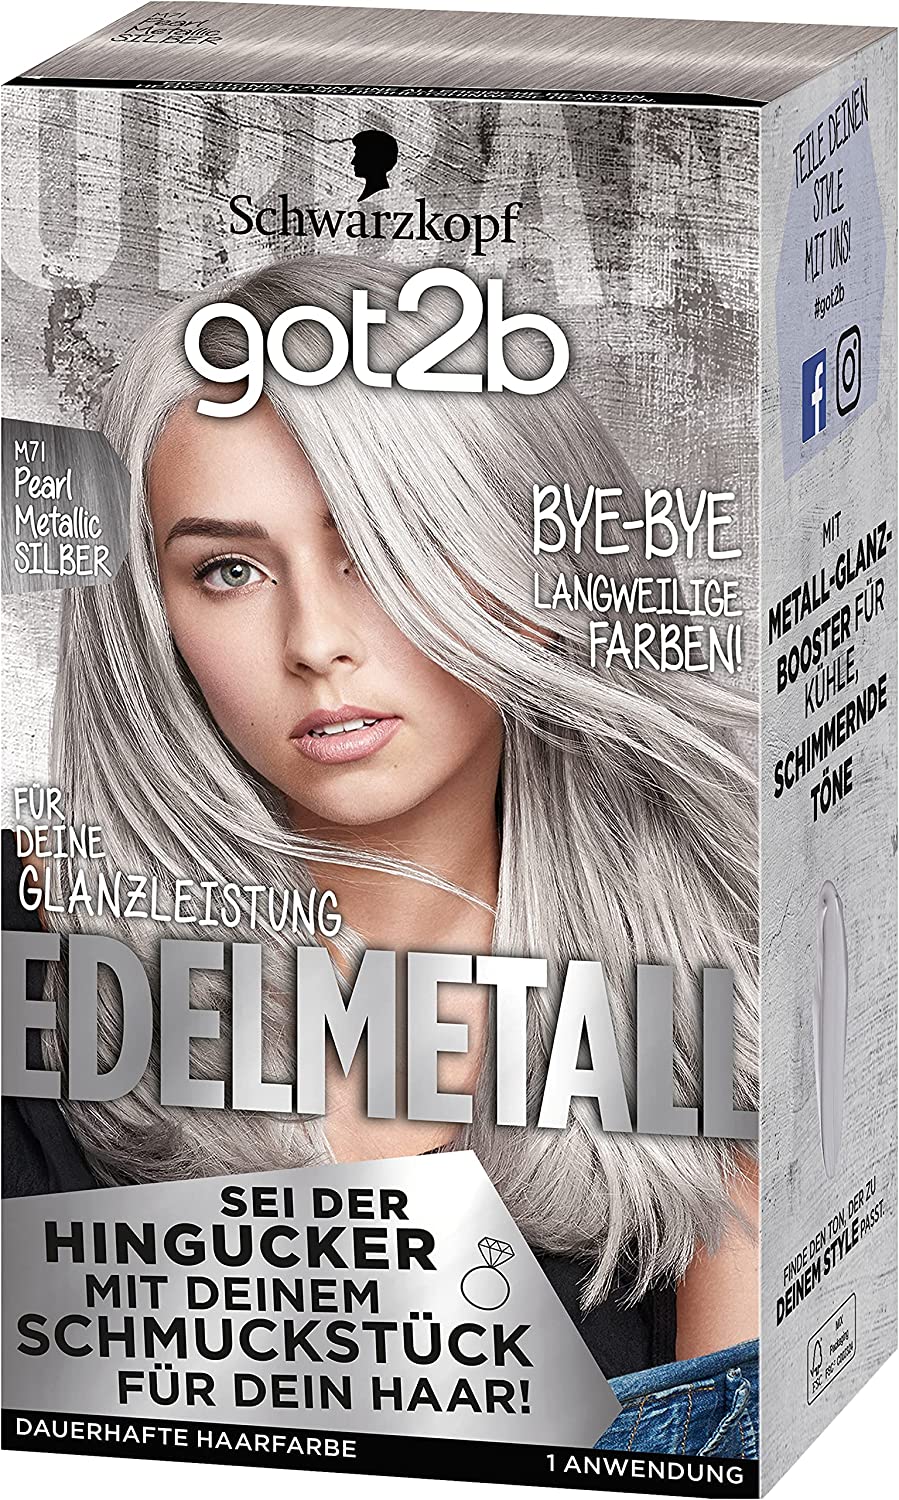 got2b Precious Metal M71 Pearl Metallic Silver Level 3 (3 x 143 ml), Hair Colour with Metal Shine Booster for Cool, Shimmering Tones, Anti-Fading Effect, ‎pearl